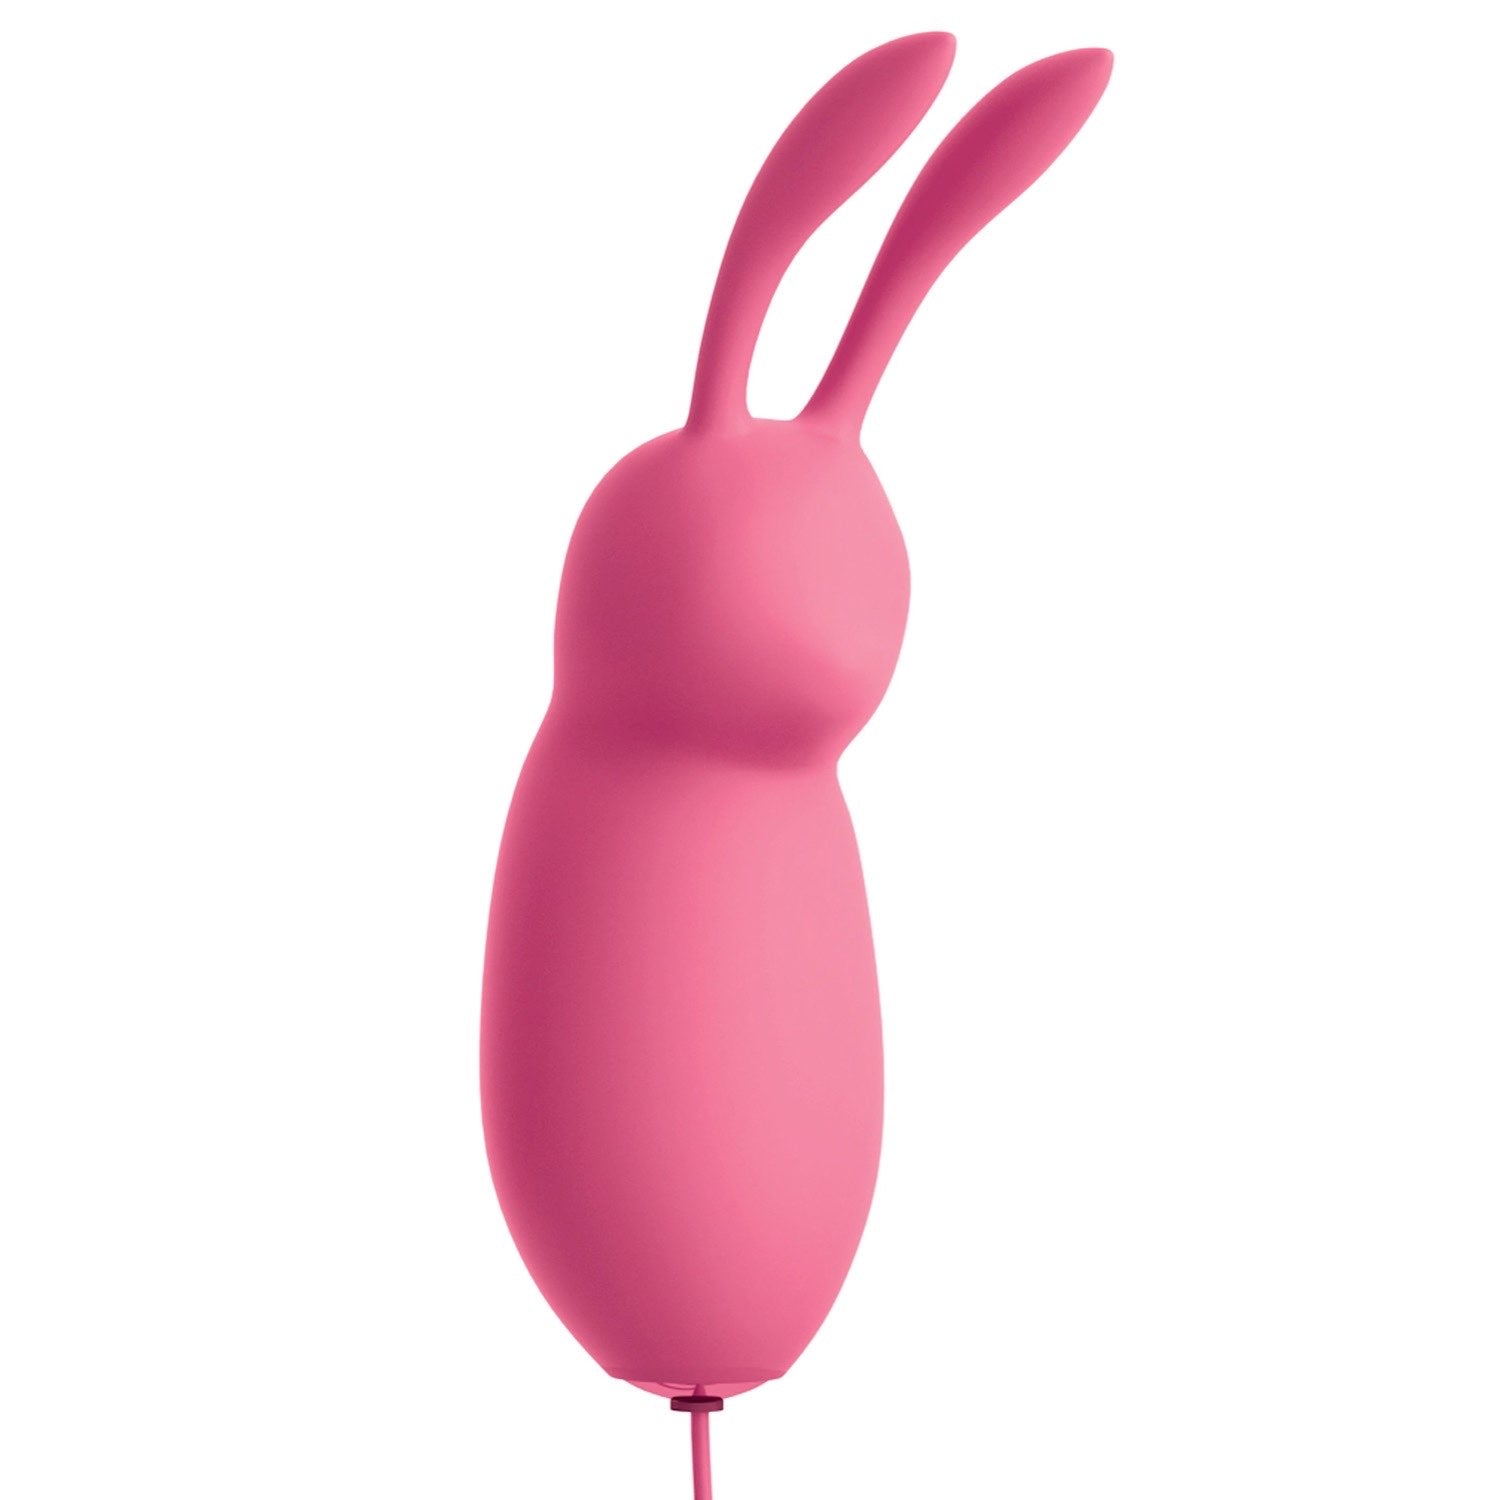 Omg! OMG! Bullets #Cute - Pink USB Powered Rabbit Bullet by Pipedream